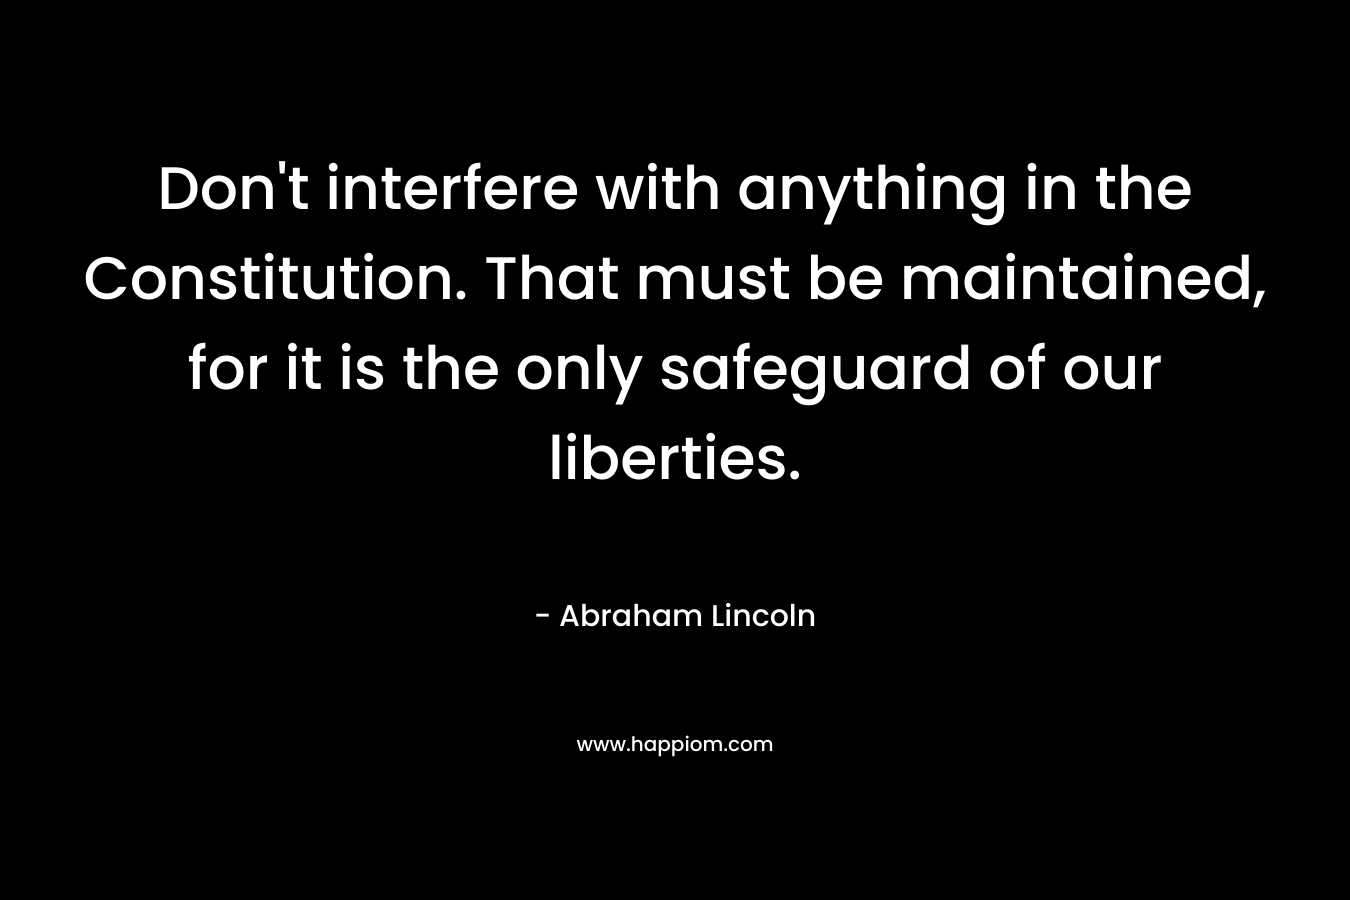 Don’t interfere with anything in the Constitution. That must be maintained, for it is the only safeguard of our liberties. – Abraham Lincoln